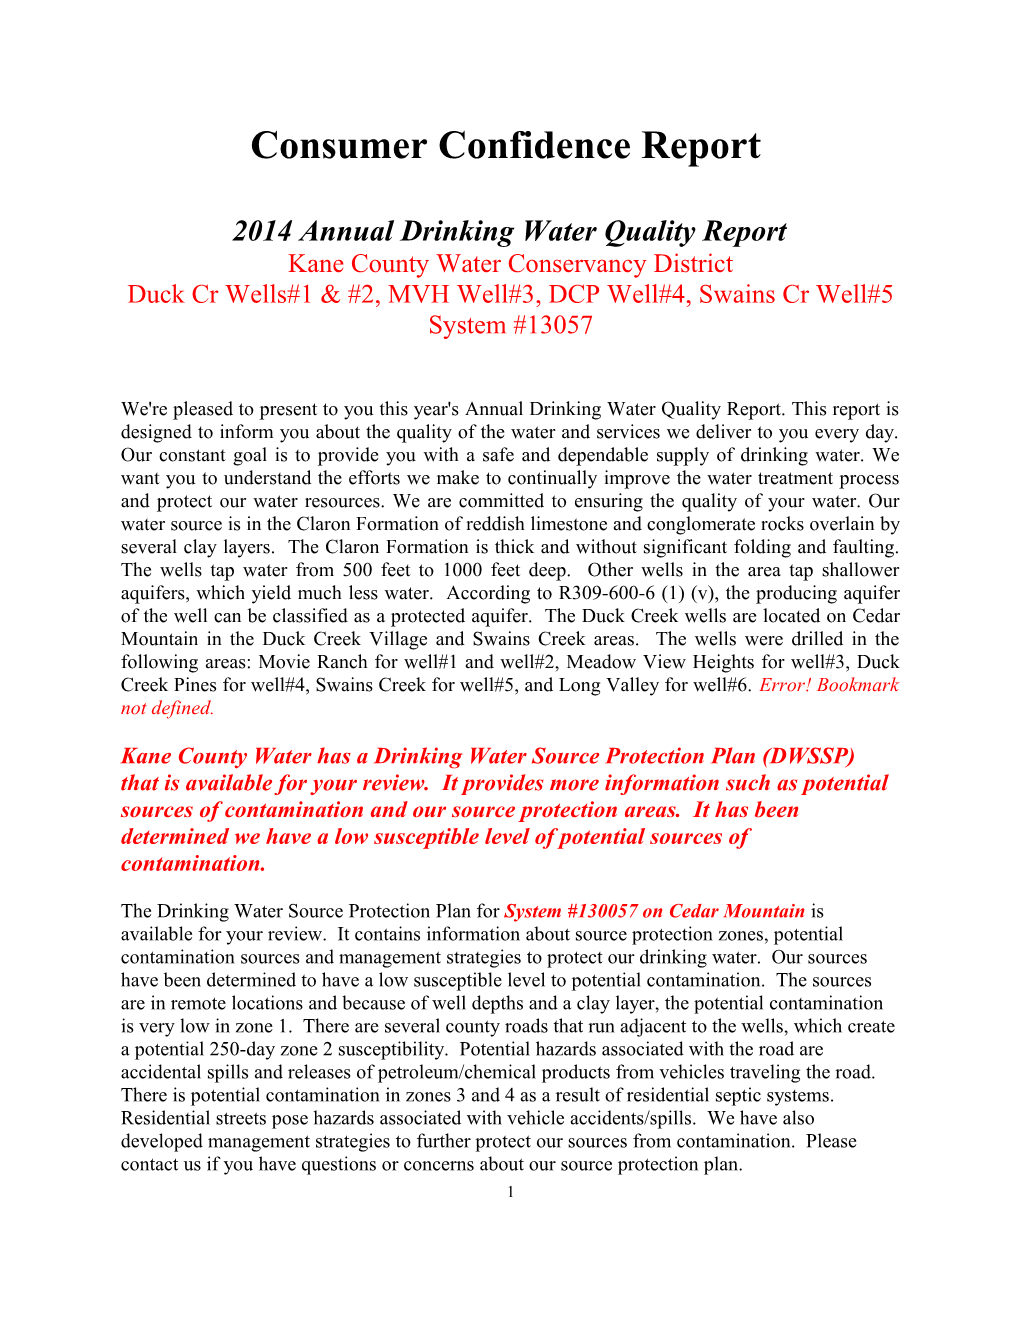 2014Annual Drinking Water Quality Report